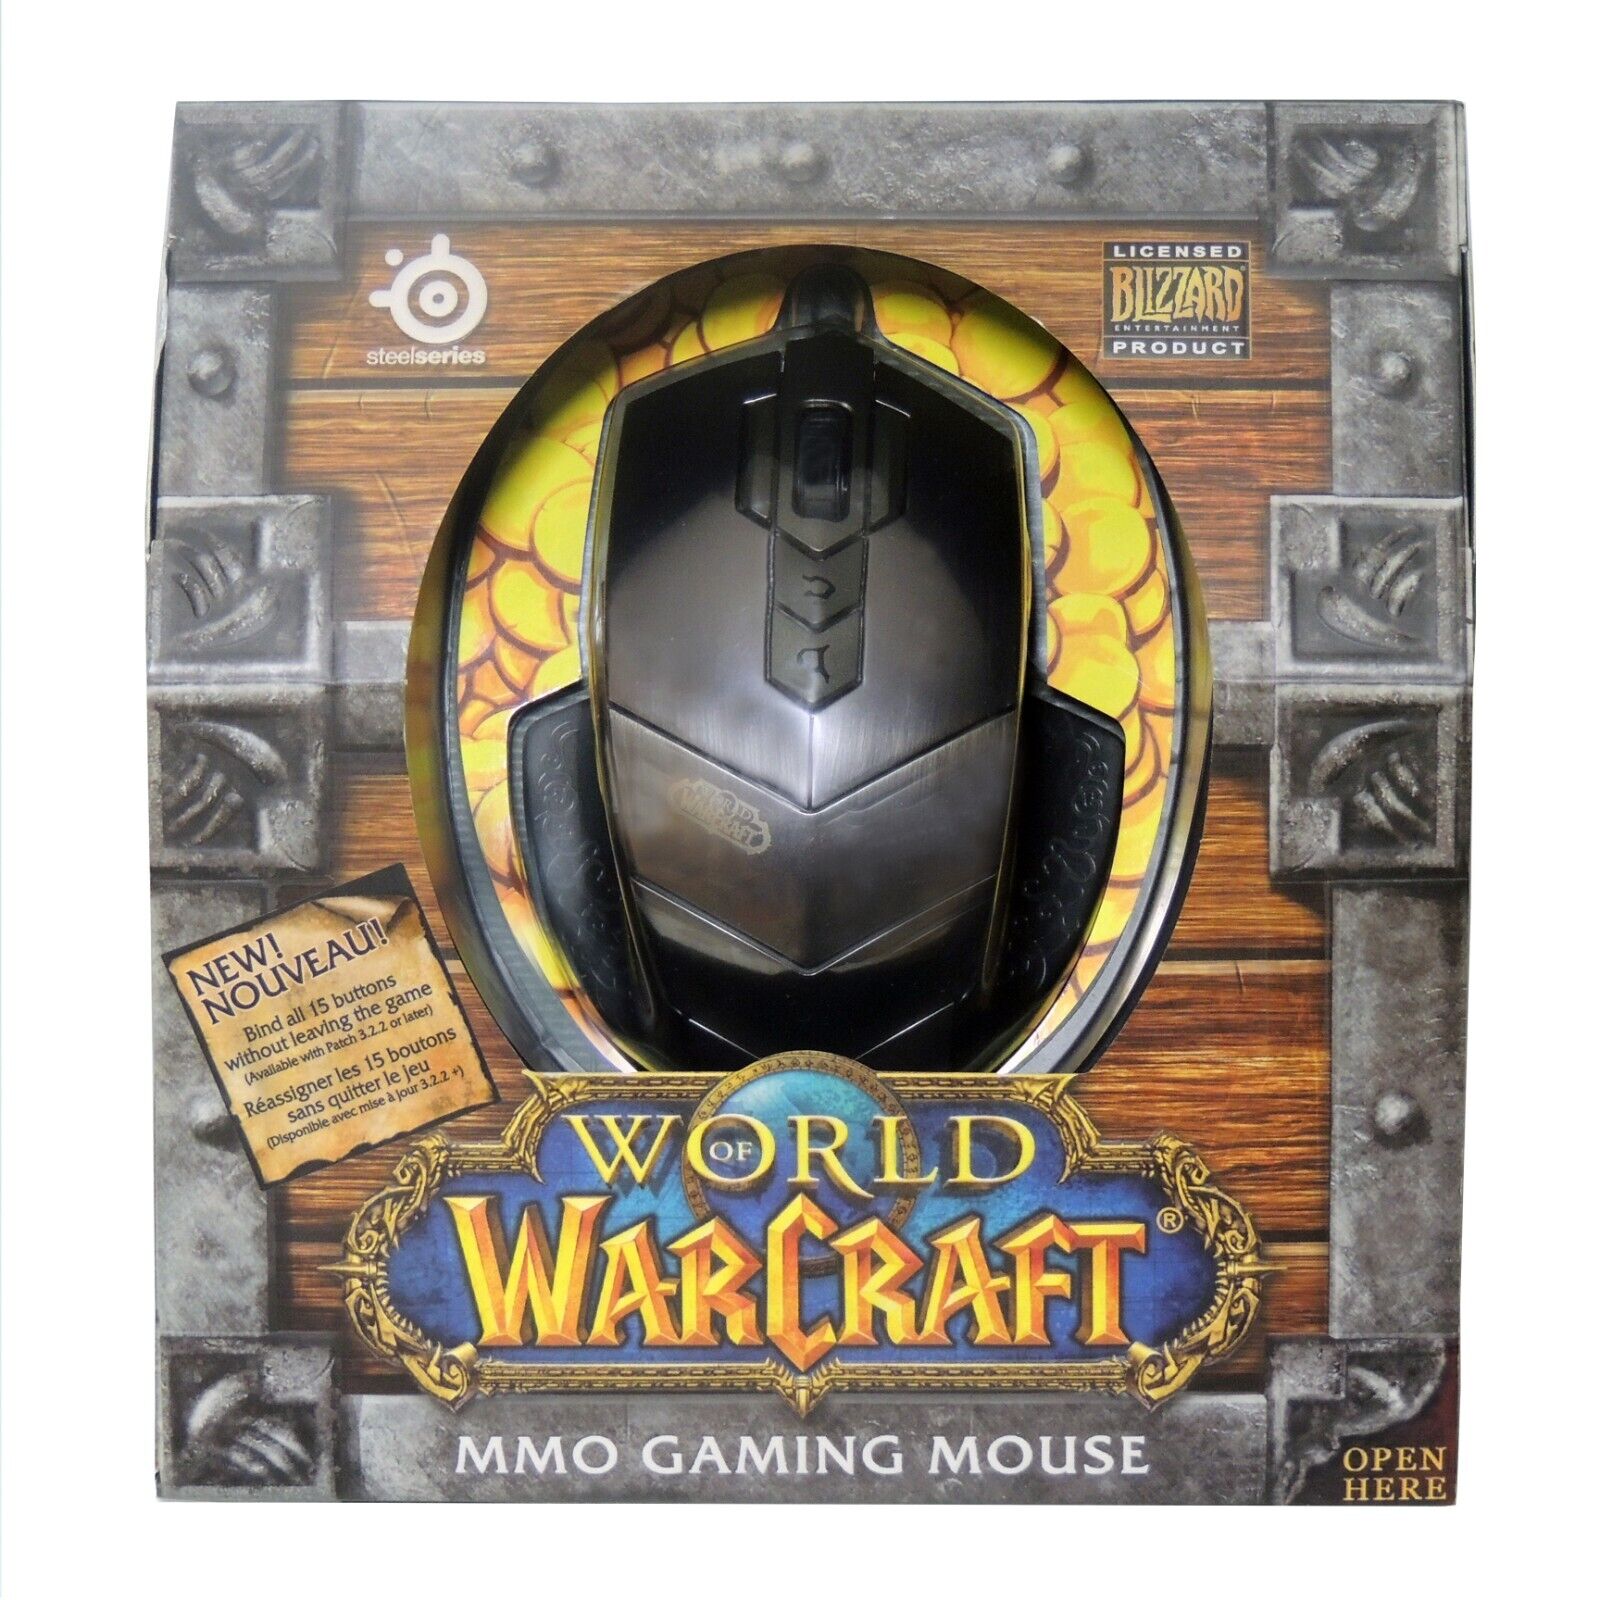 SteelSeries World of WarCraft MMO Gaming Mouse WoW USB Windows Vista XP 2000